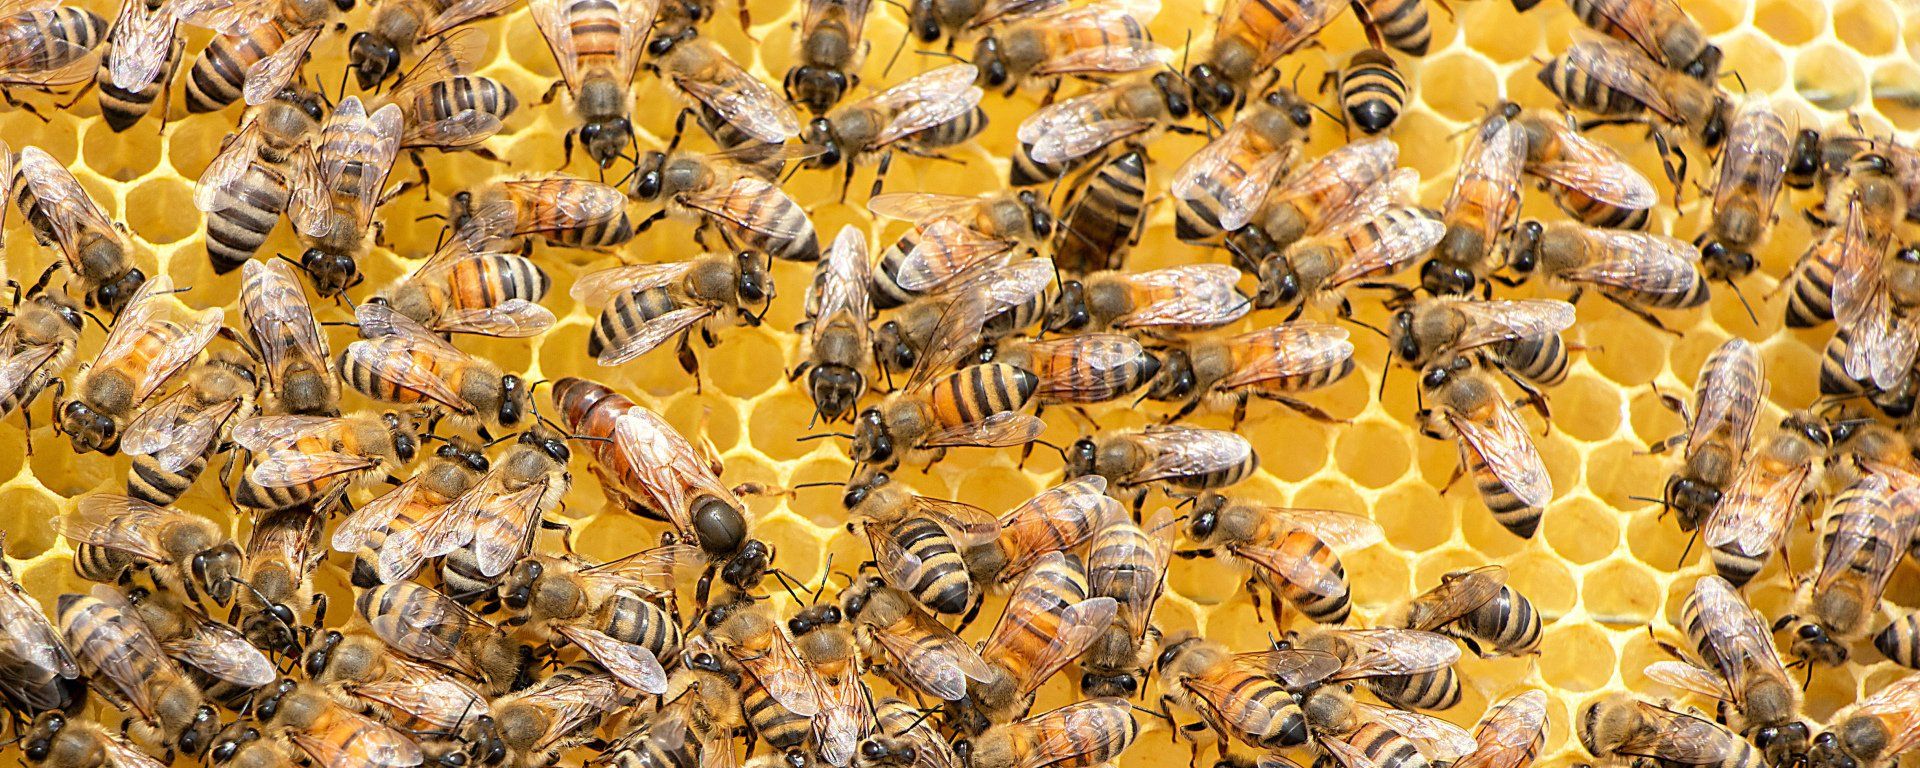 A Gardener S Guide To Protecting Honey Bees